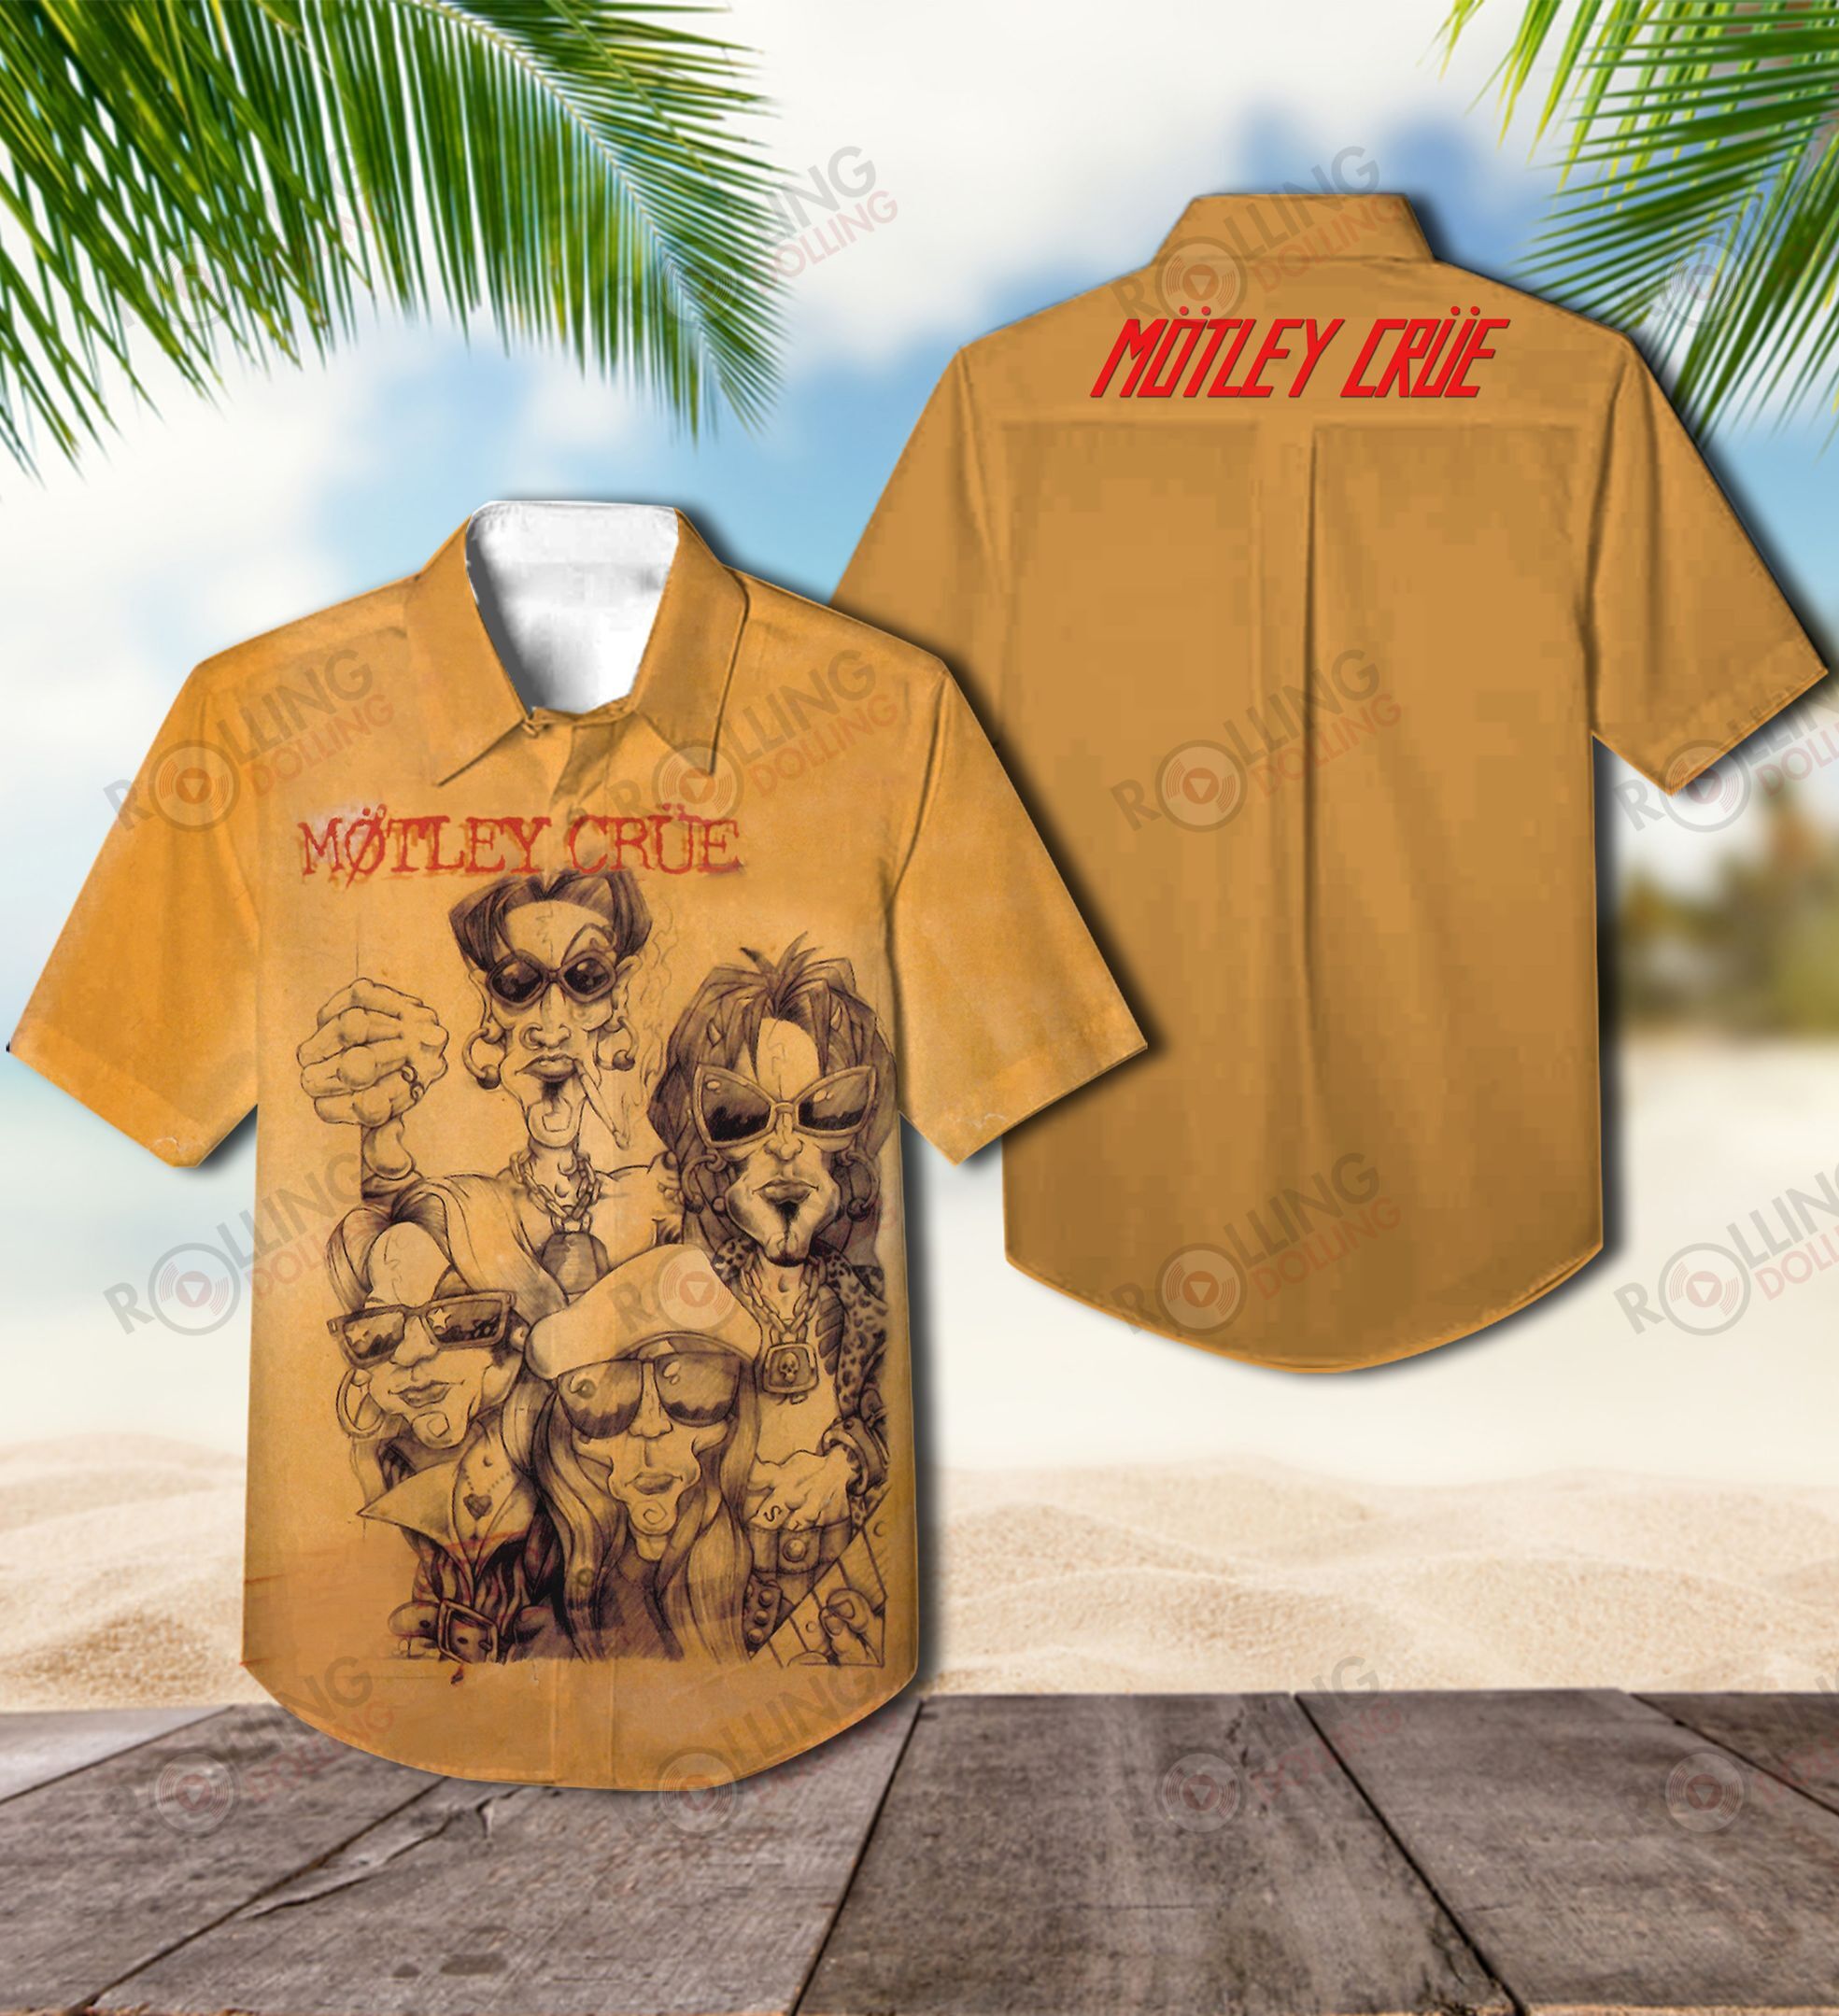 For summer, consider wearing This Amazing Hawaiian Shirt shirt in our store 57